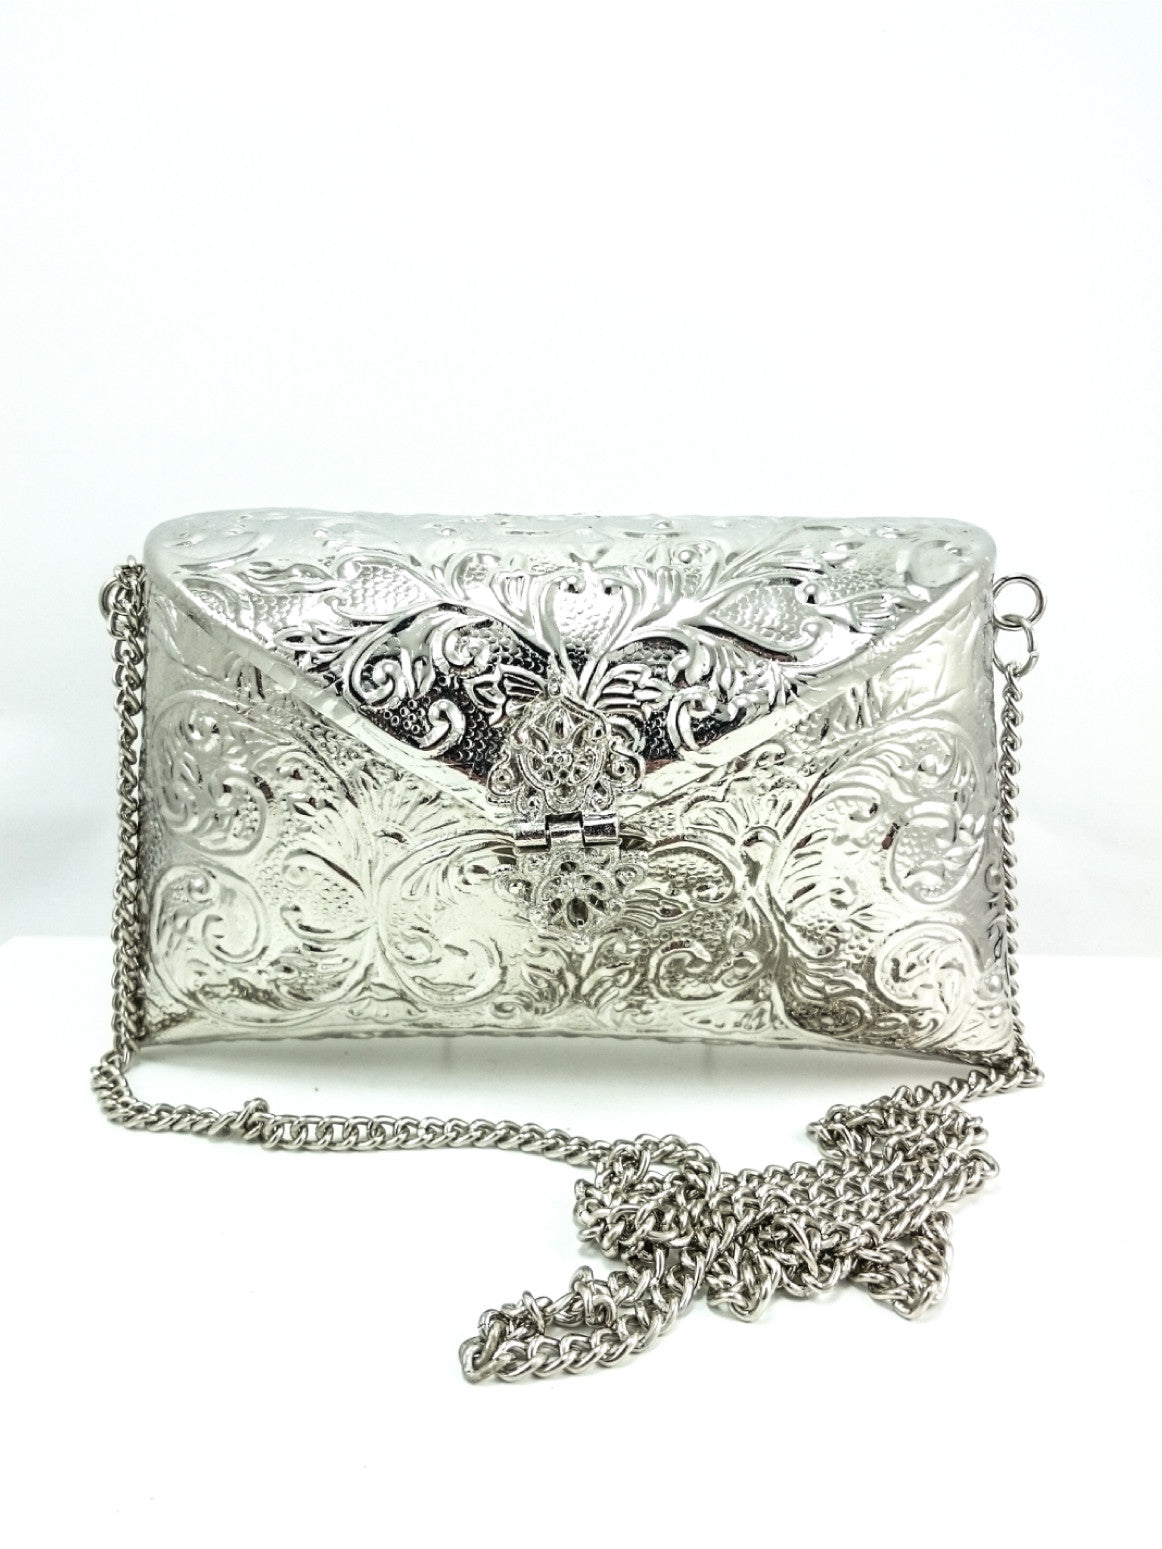 Antique Metal Clutch Indian Handmade Silver Metal Party Sling Bag Style  Purse | eBay